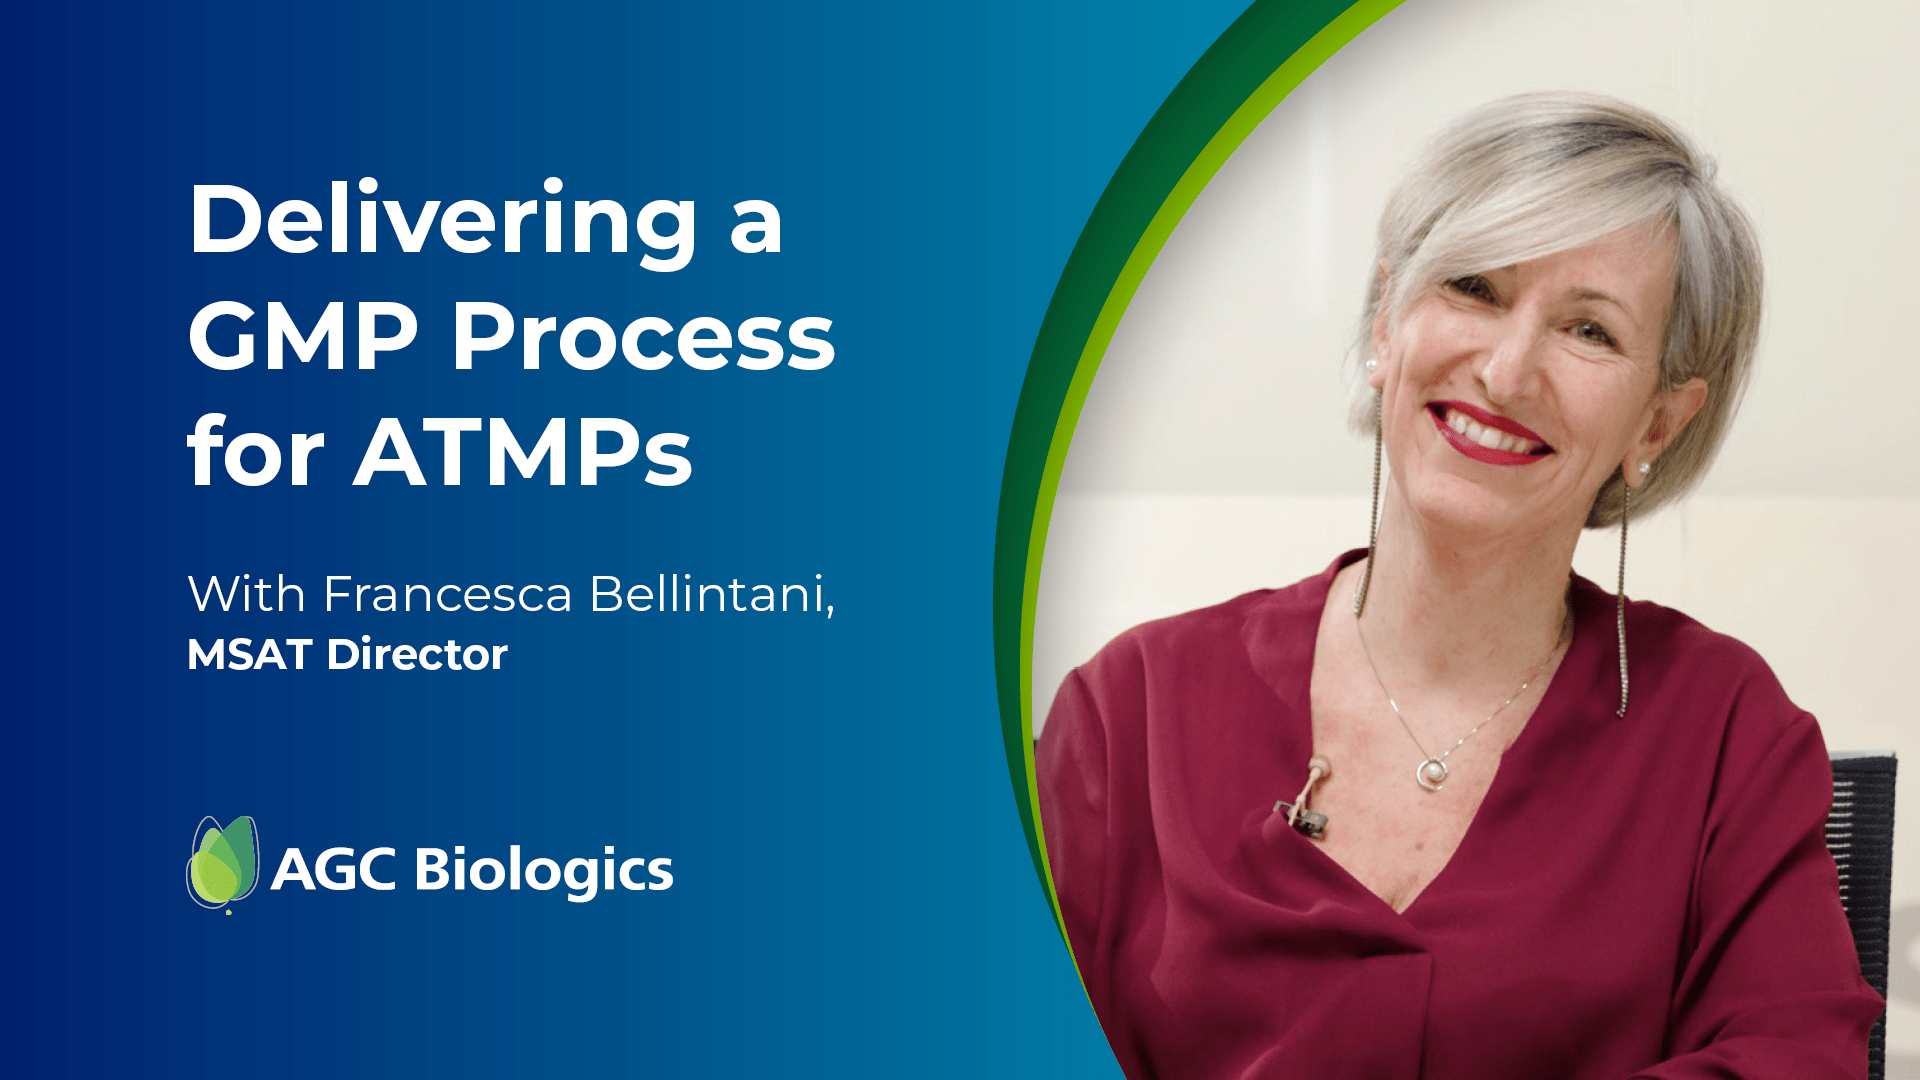 Delivering a GMP Process for ATMPs with Francesca Bellintani